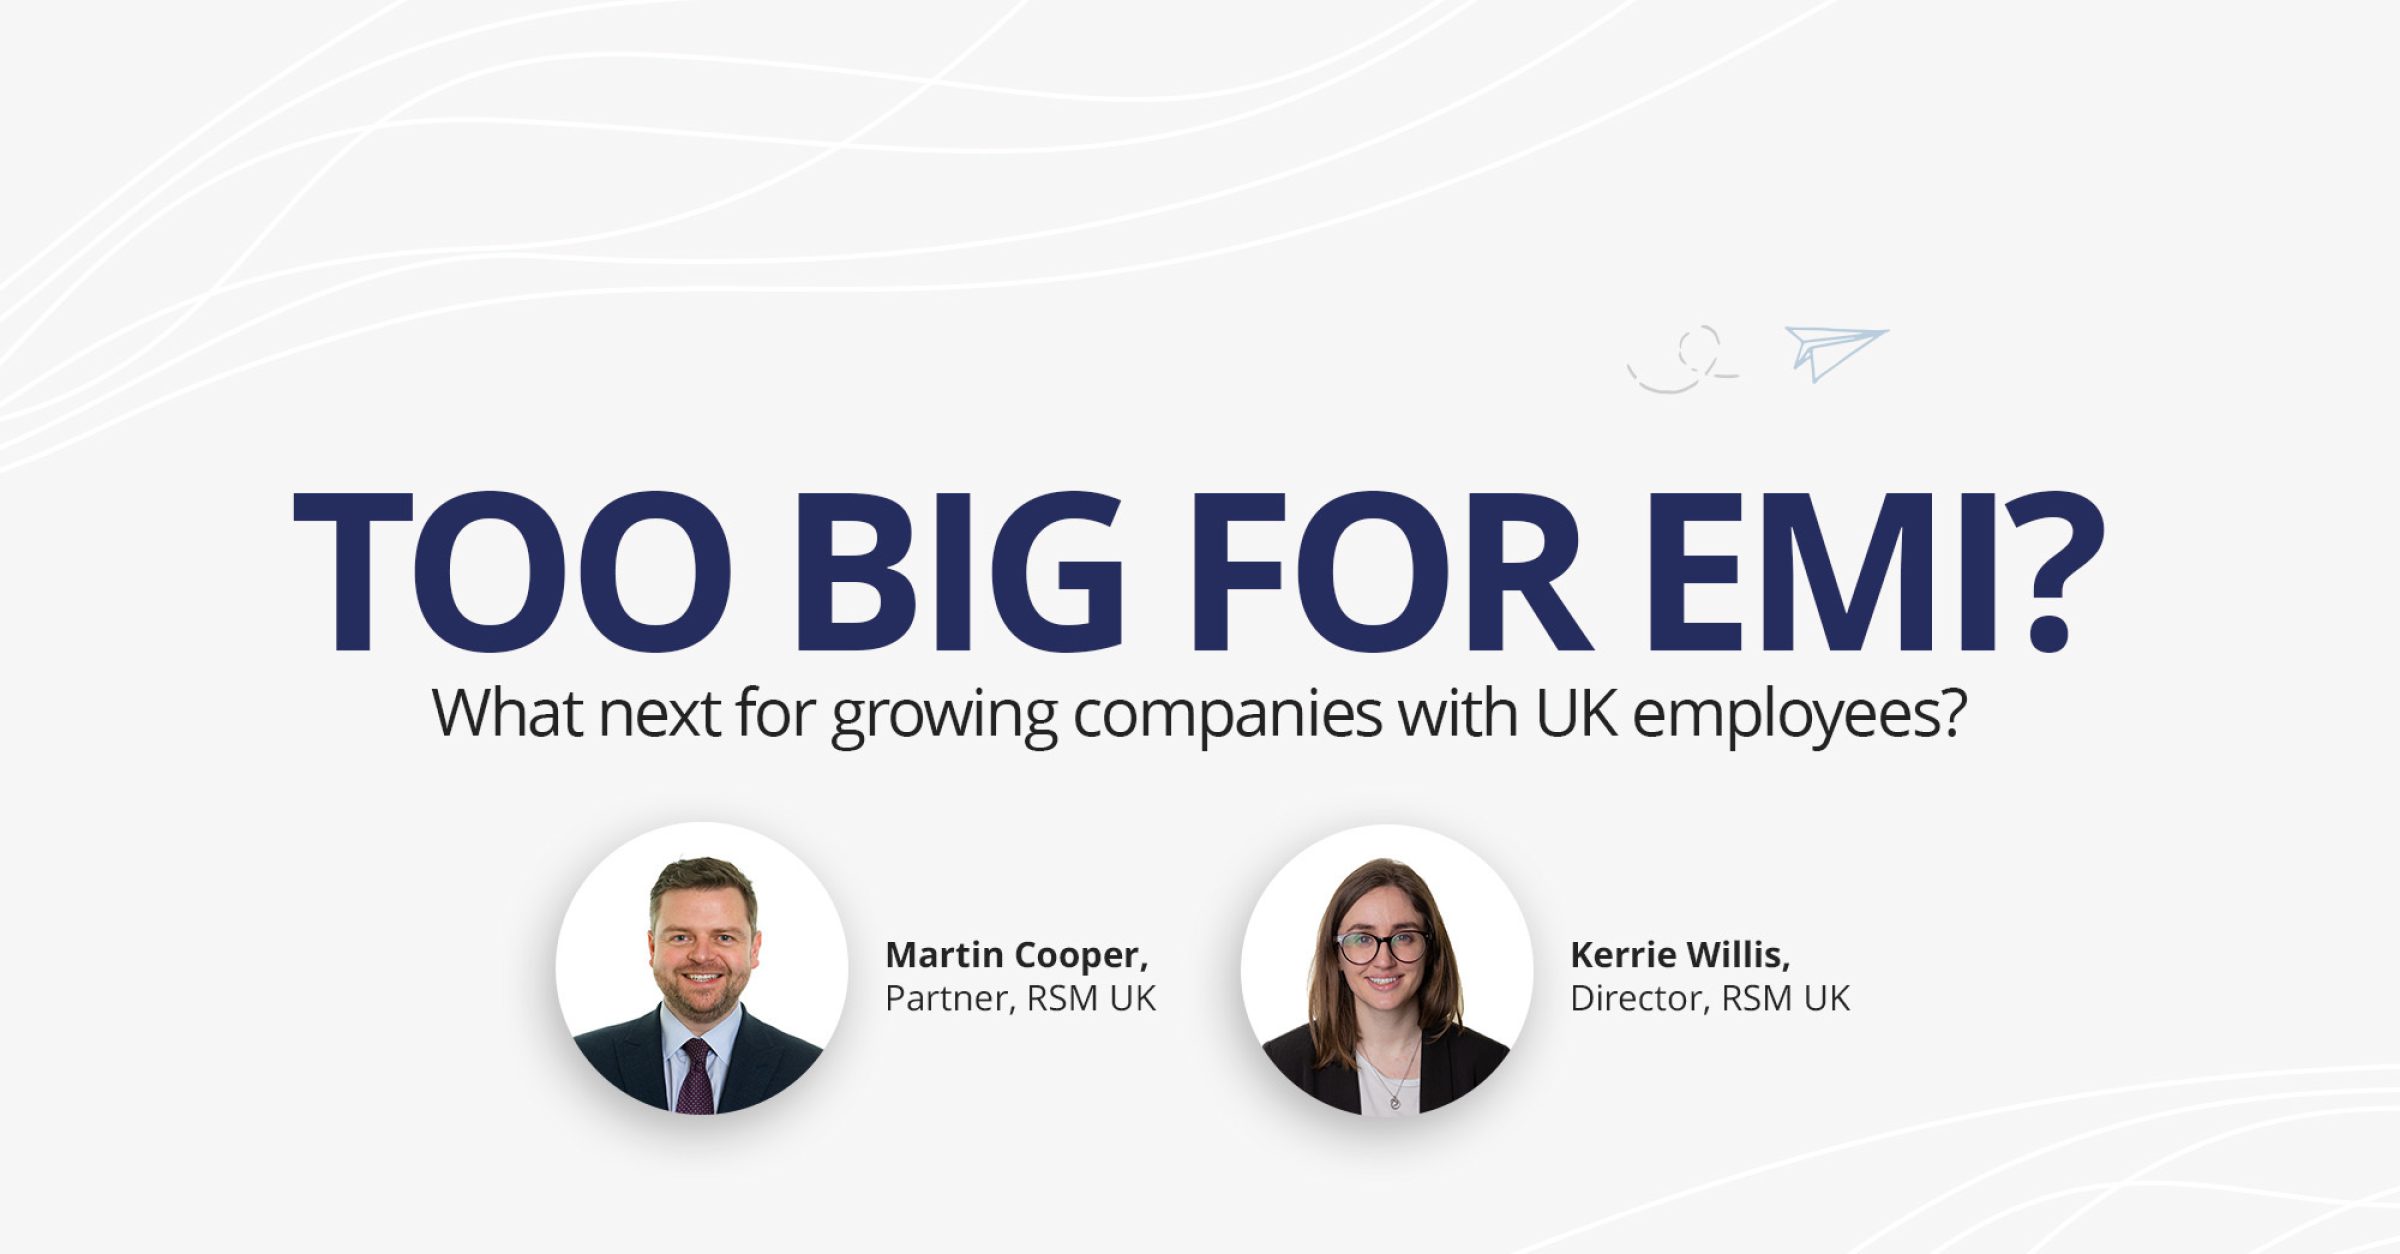 Too big for EMI? What next for growing companies with UK employees?